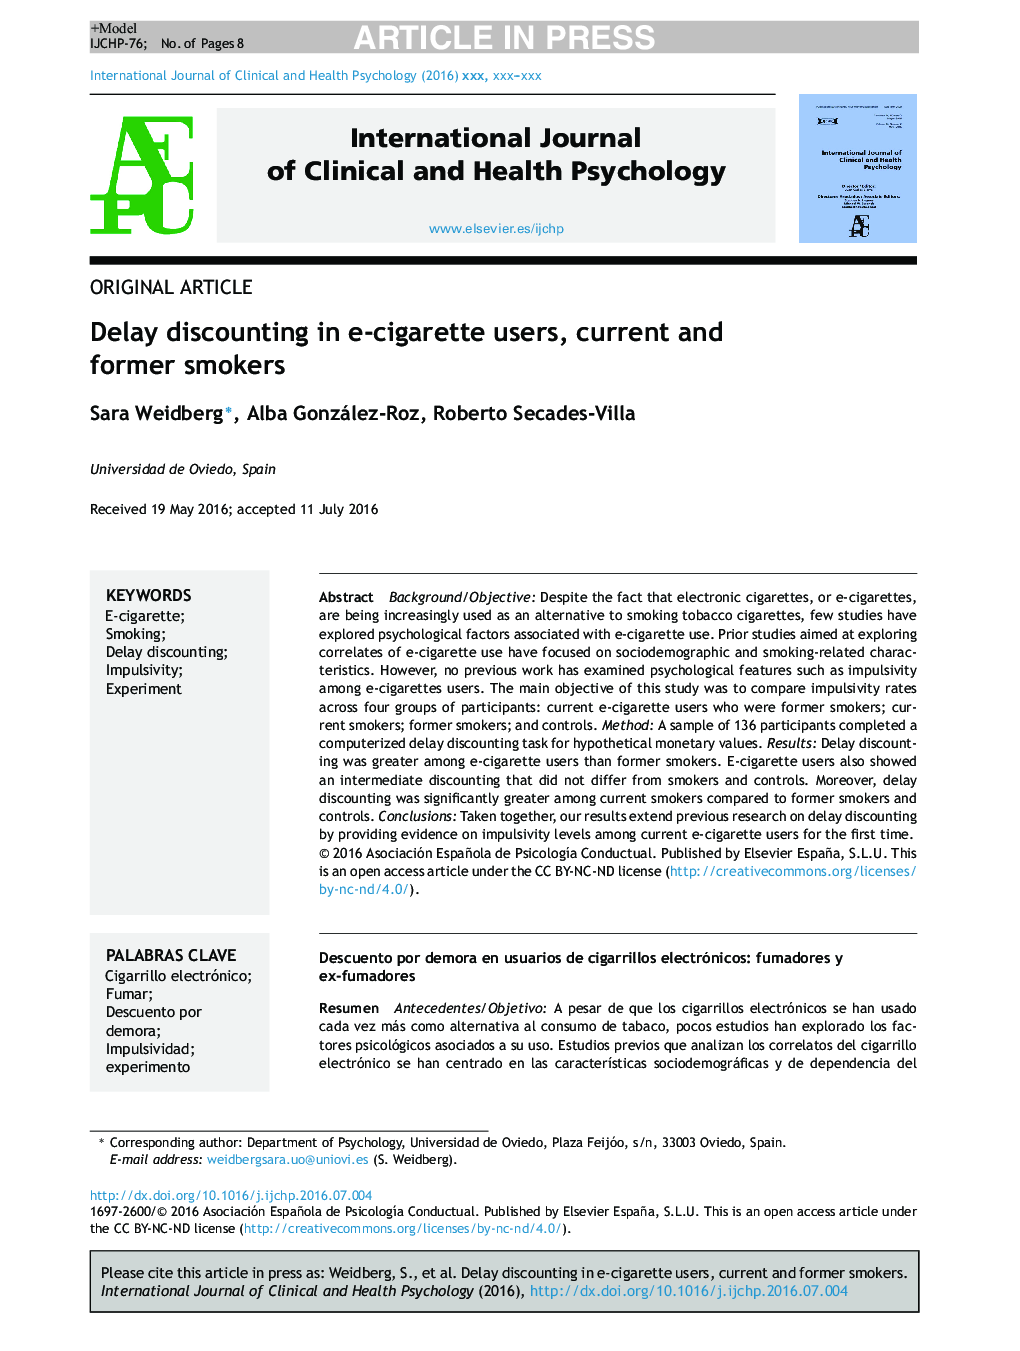 Delay discounting in e-cigarette users, current and former smokers